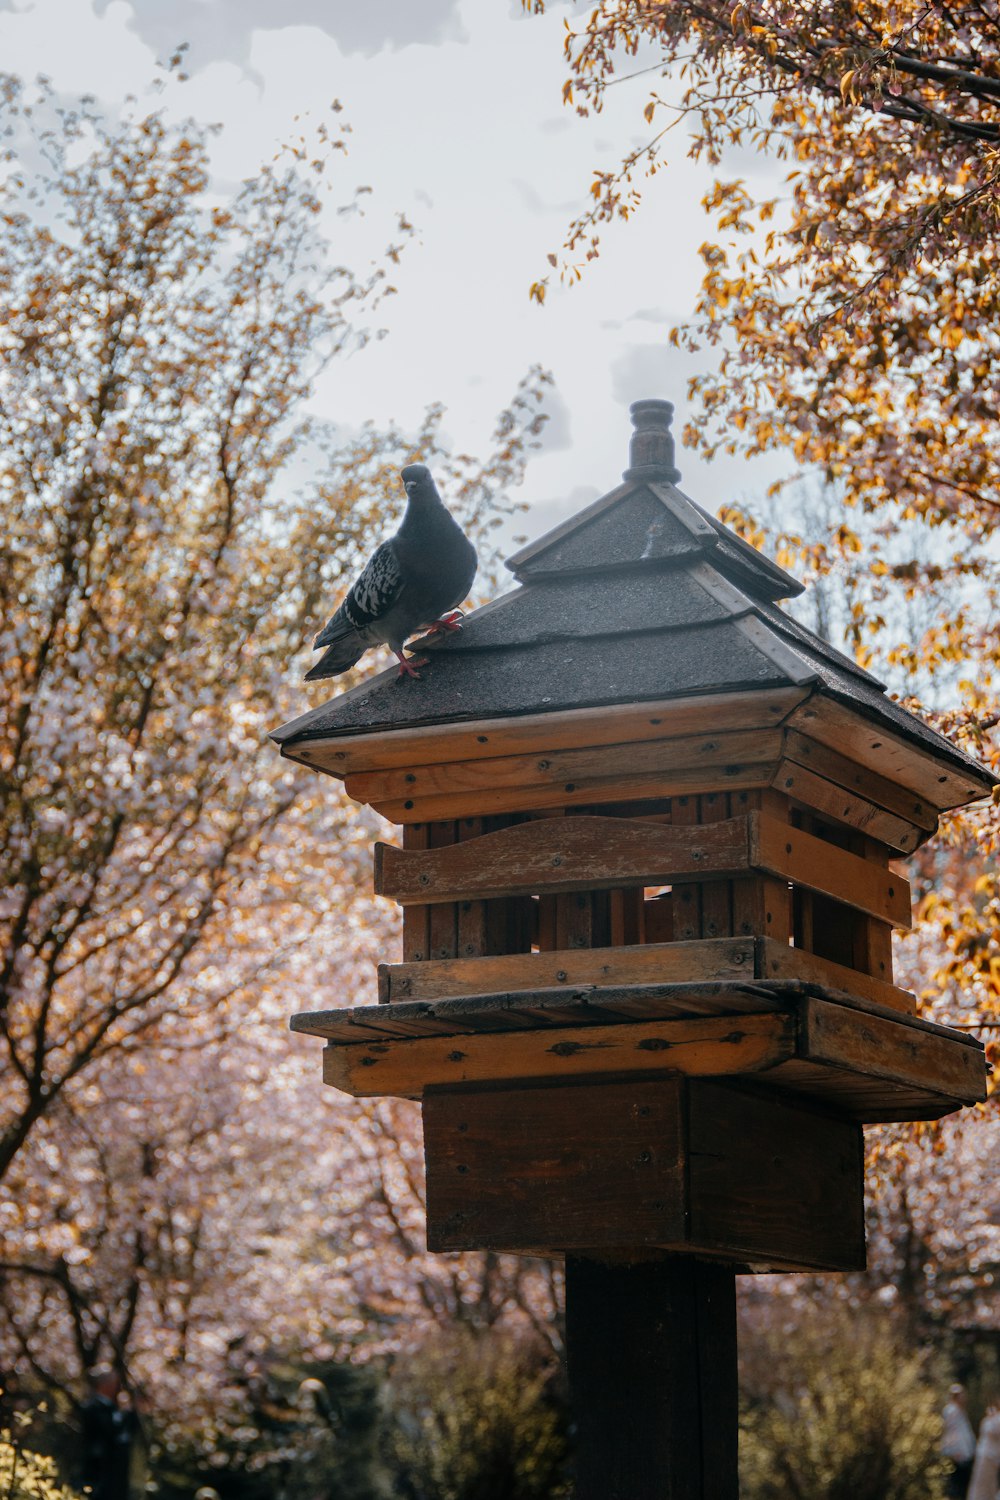 a bird is perched on top of a bird house